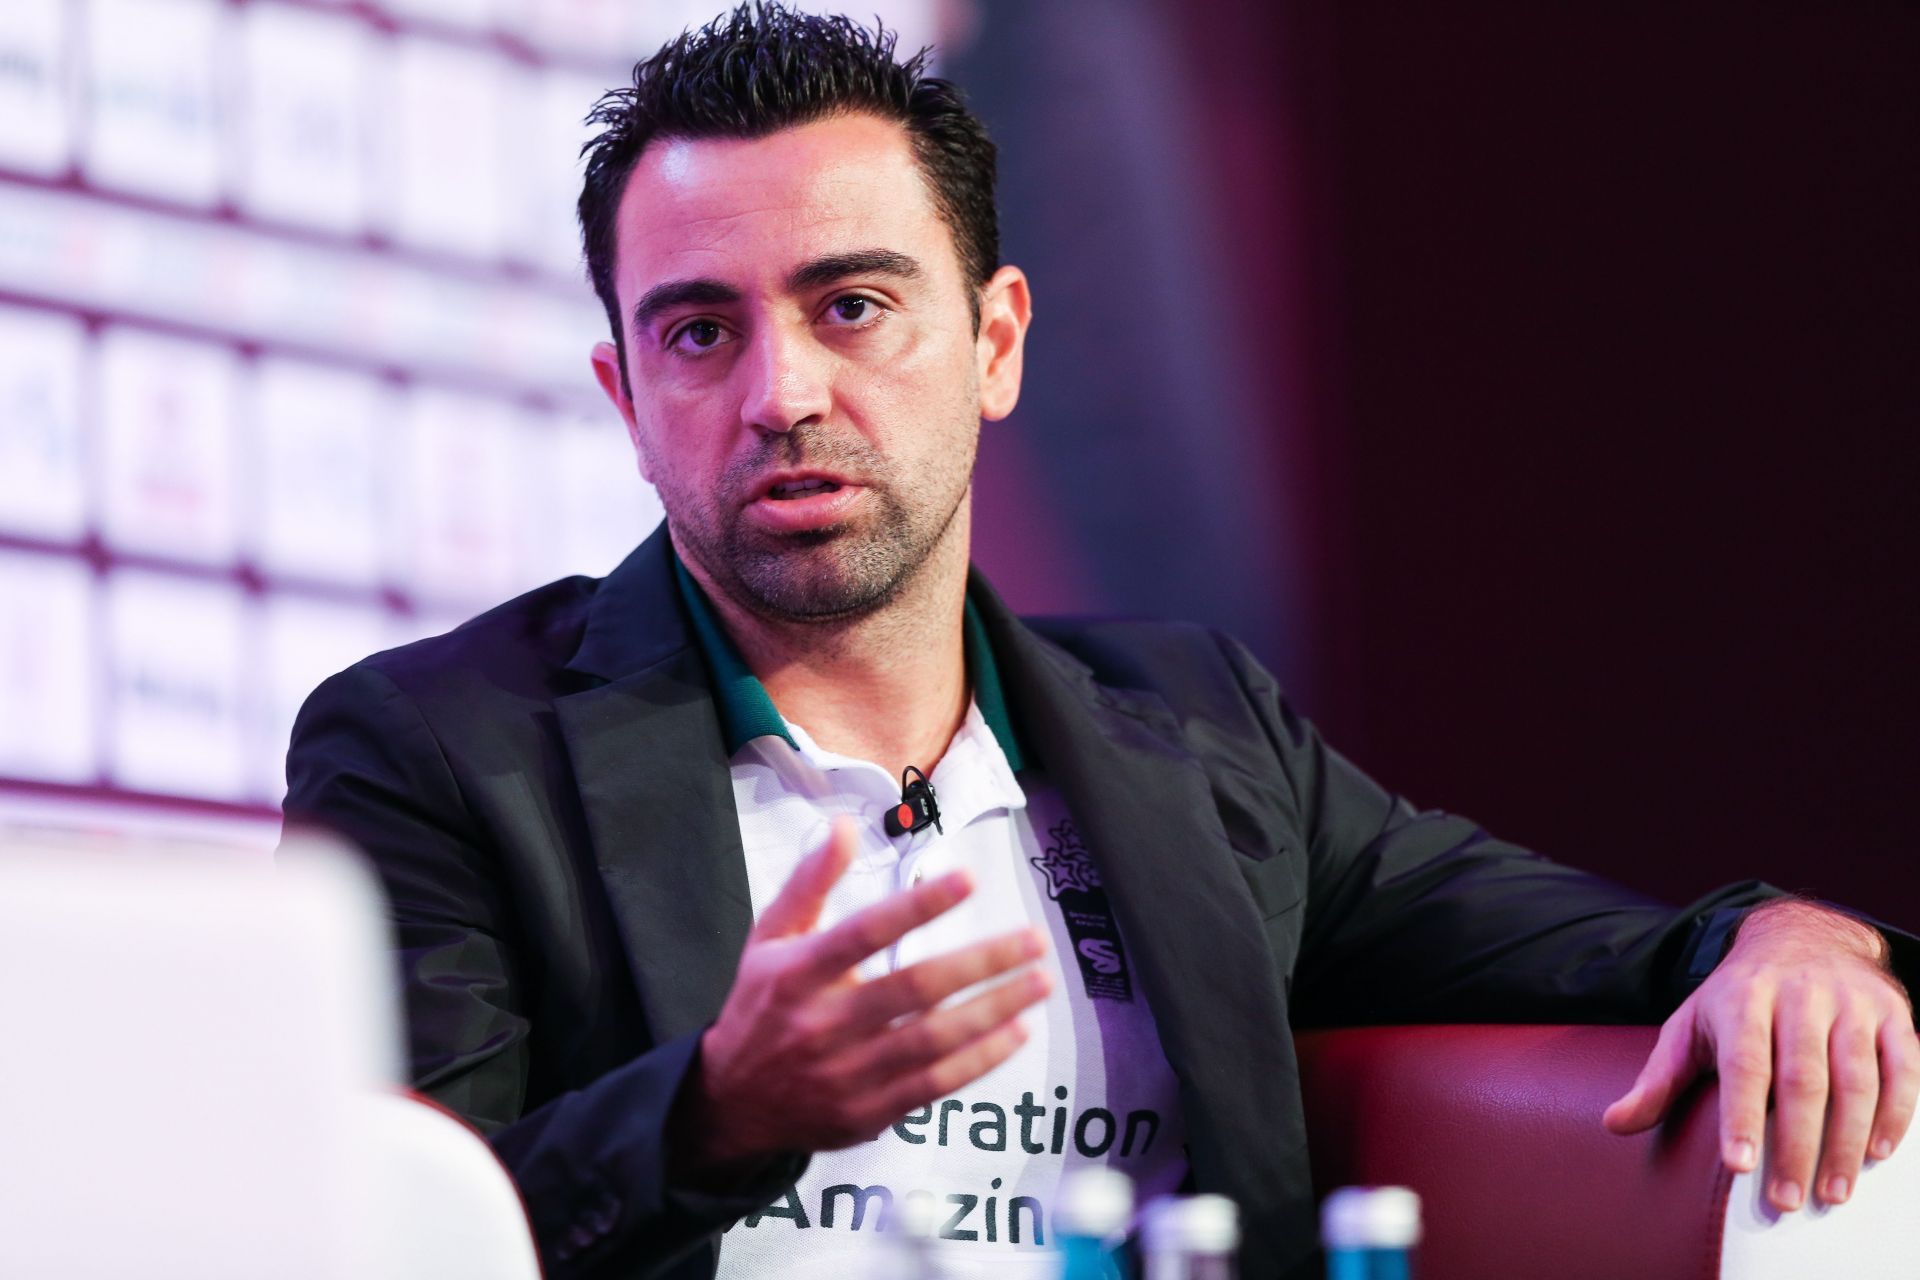 Barcelona are closing in on appointing Xavi as their next manager